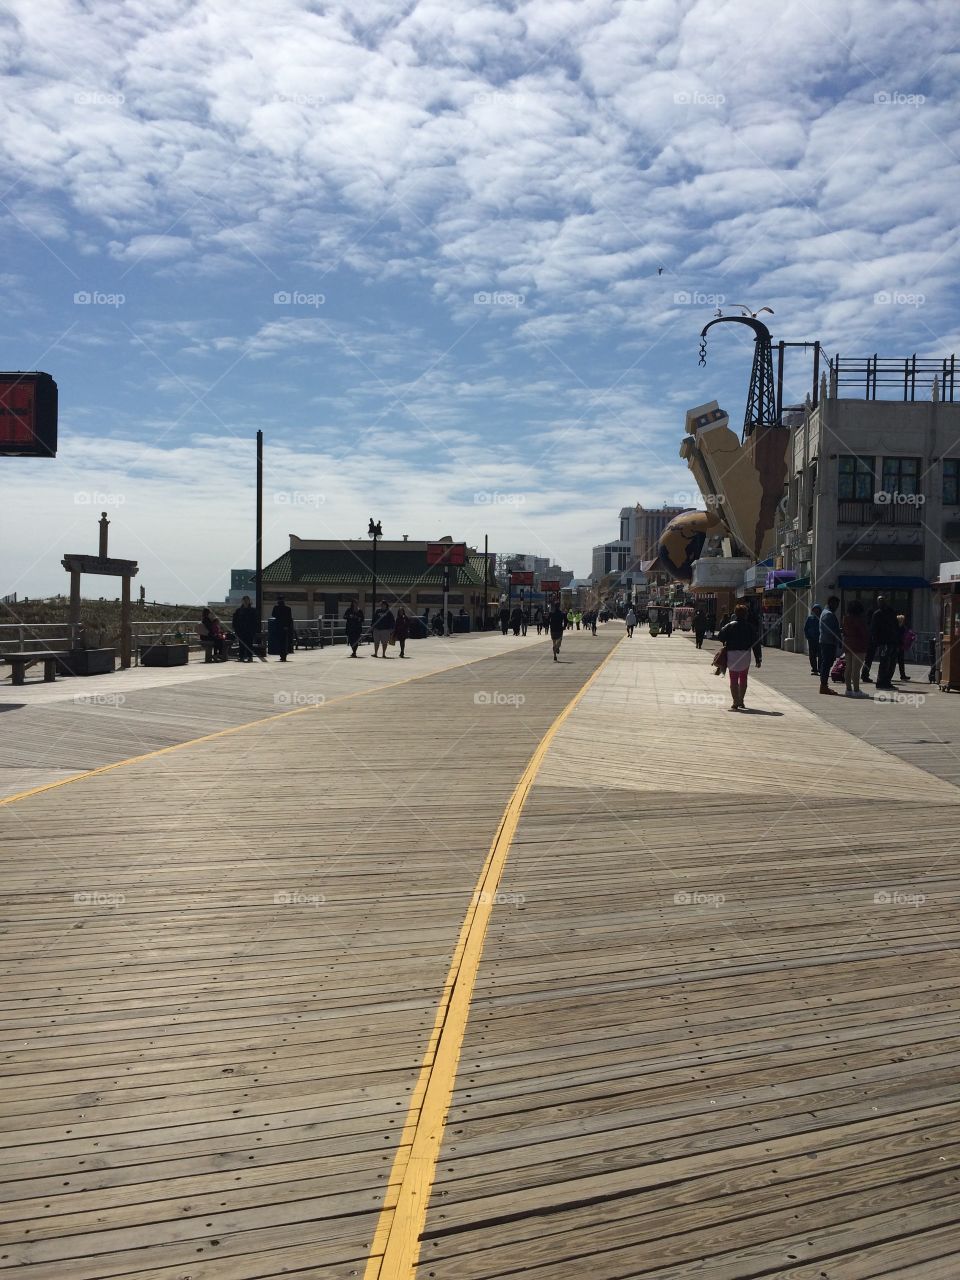 Boardwalk at Atlantic City, with its distinct wooden architecture